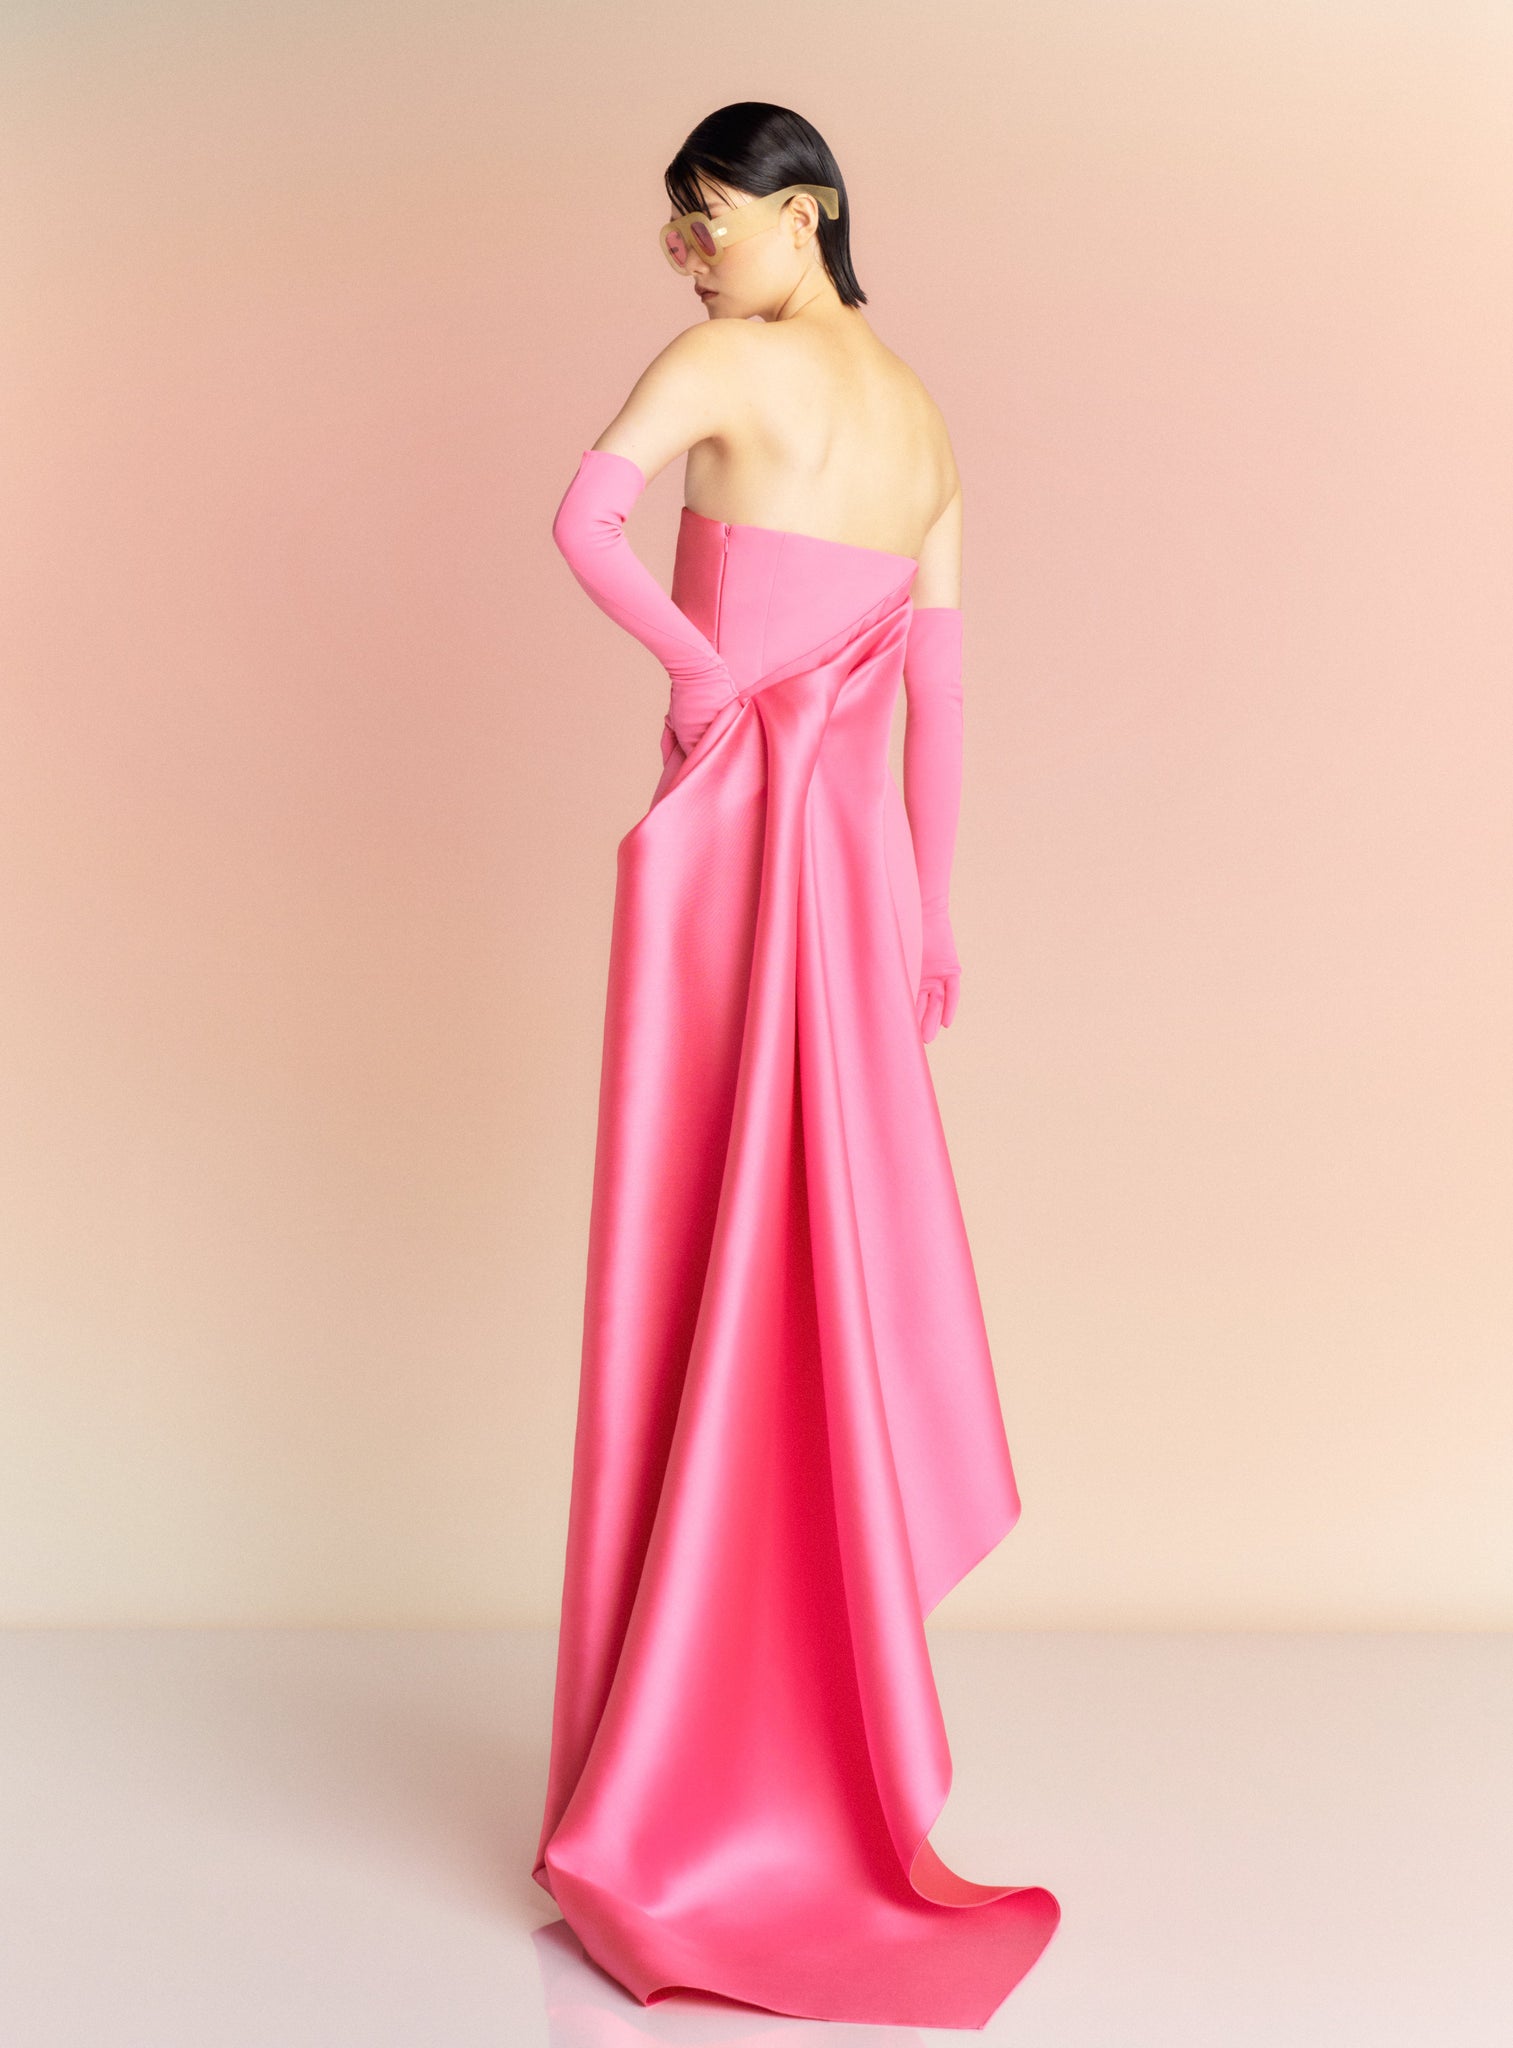 The Kinsley Maxi Dress in Rose Pink